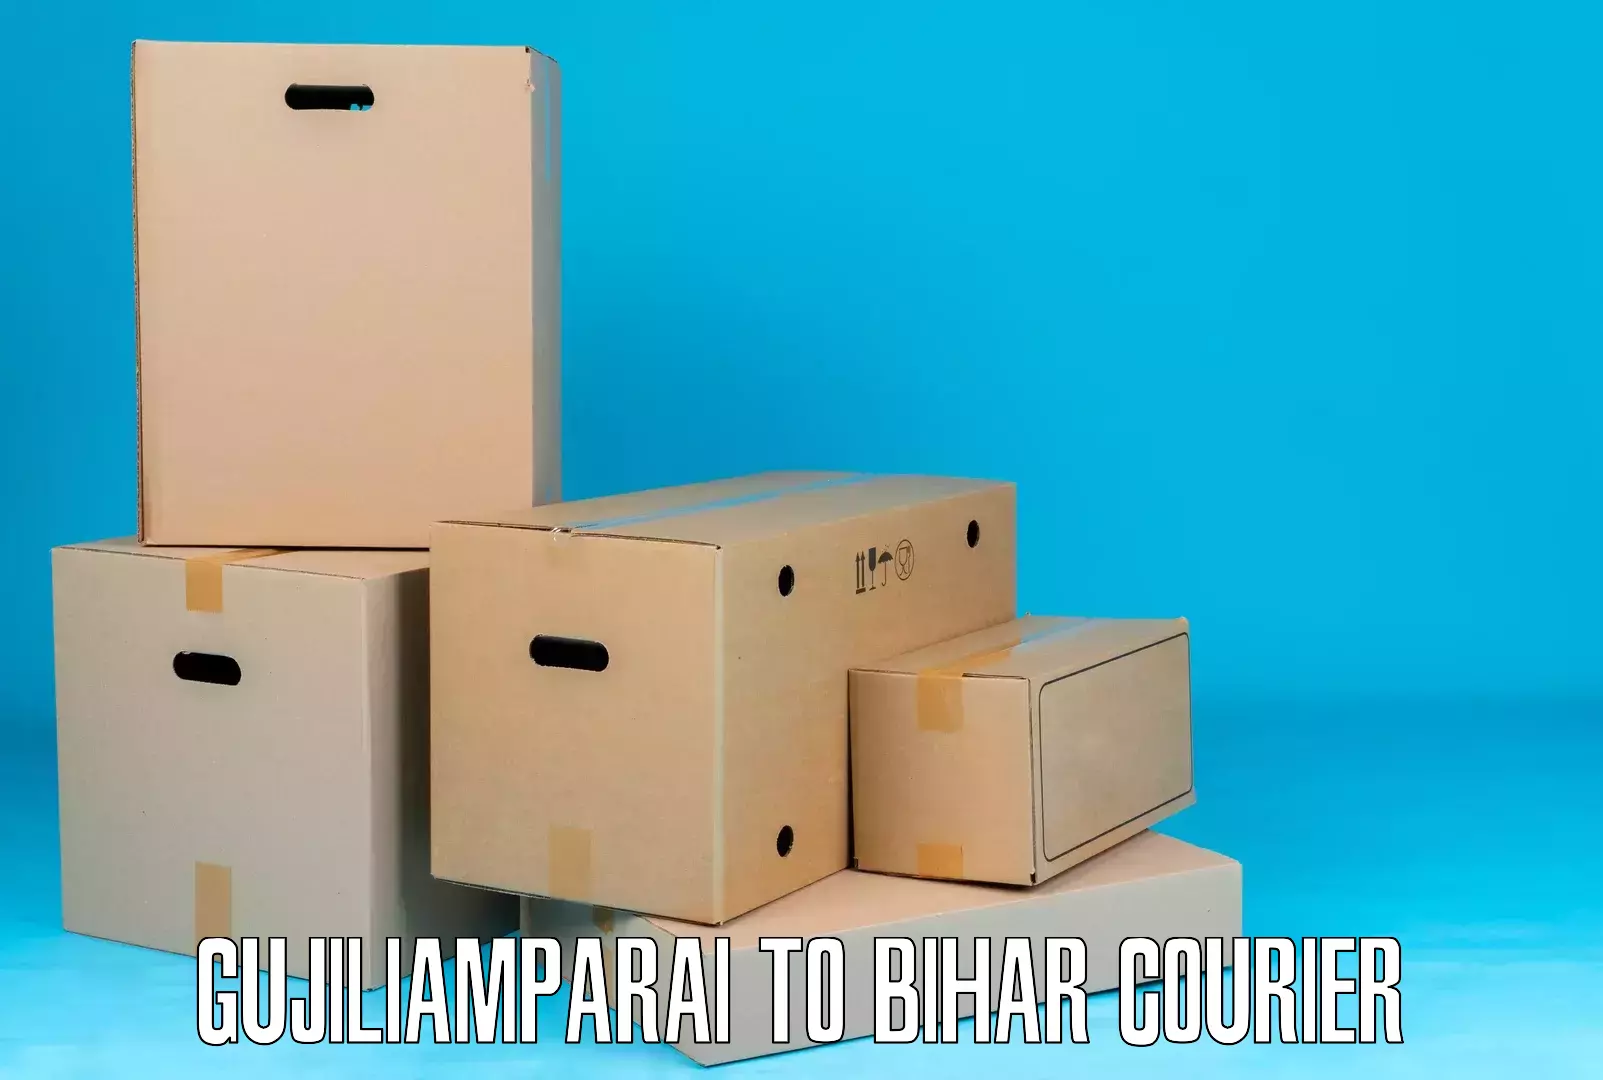 State-of-the-art courier technology Gujiliamparai to Begusarai